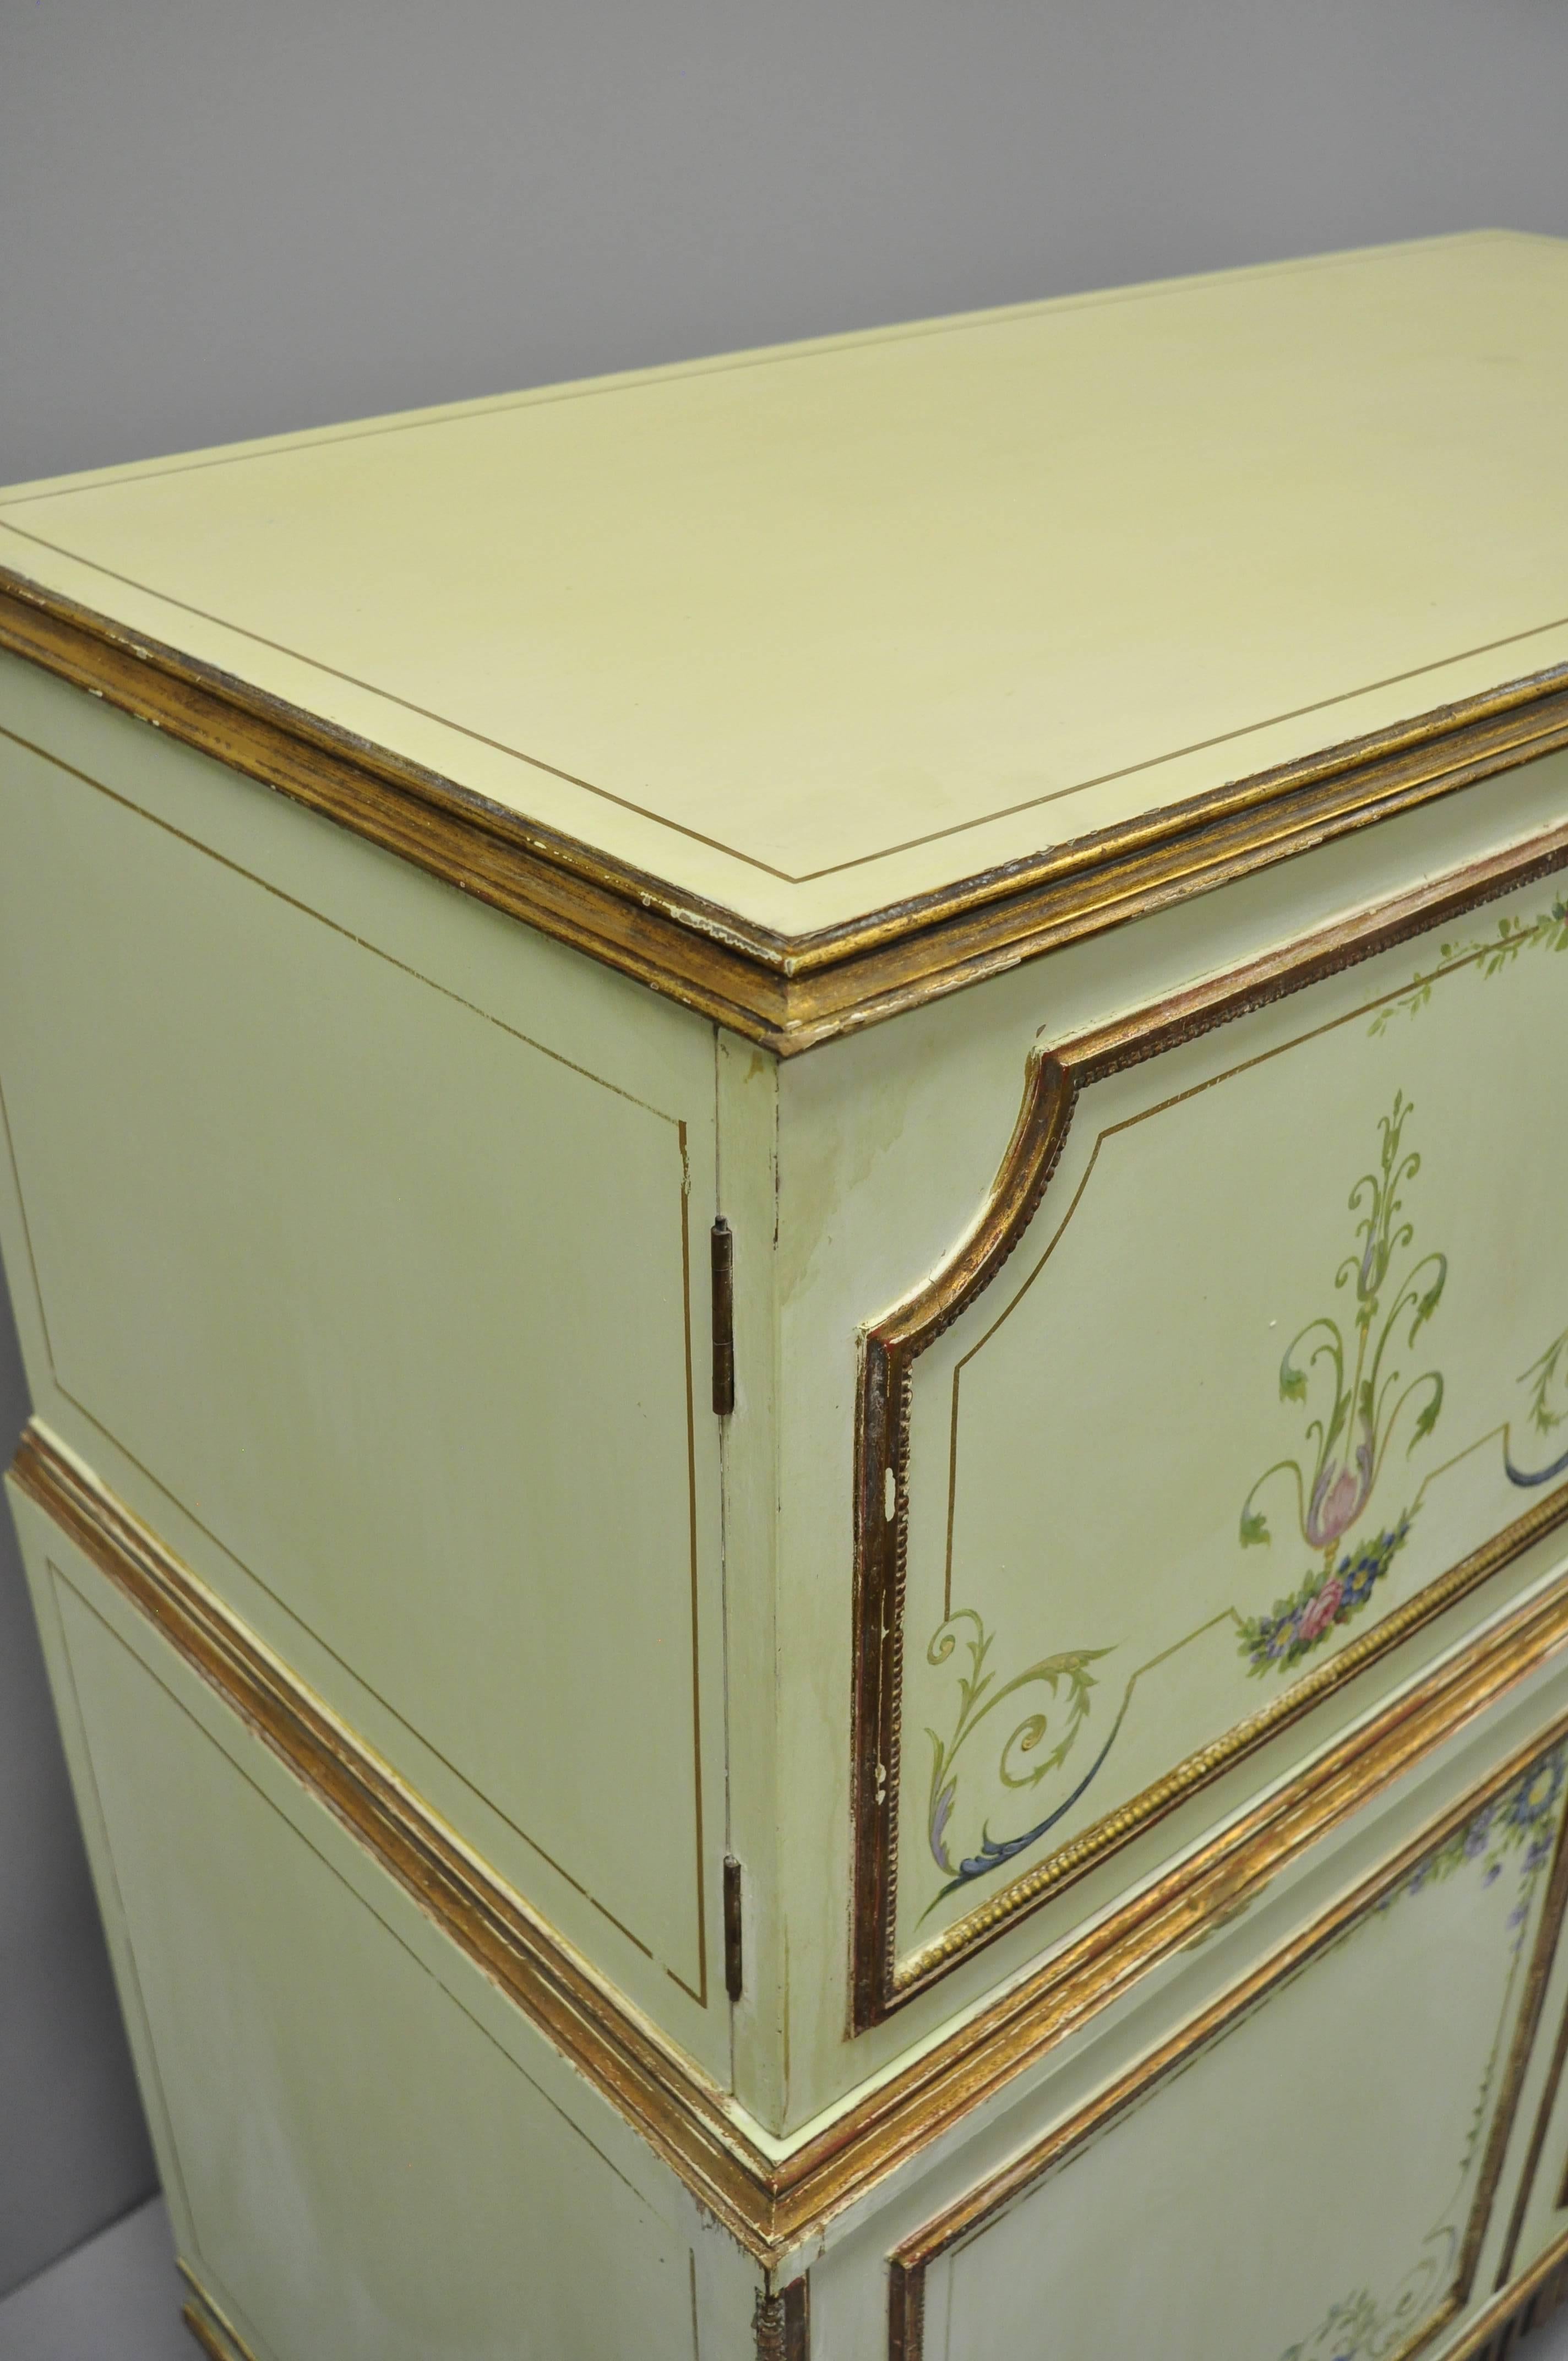 20th Century Antique Adams Style Green Painted Chest of Drawers Dresser by New York Galleries